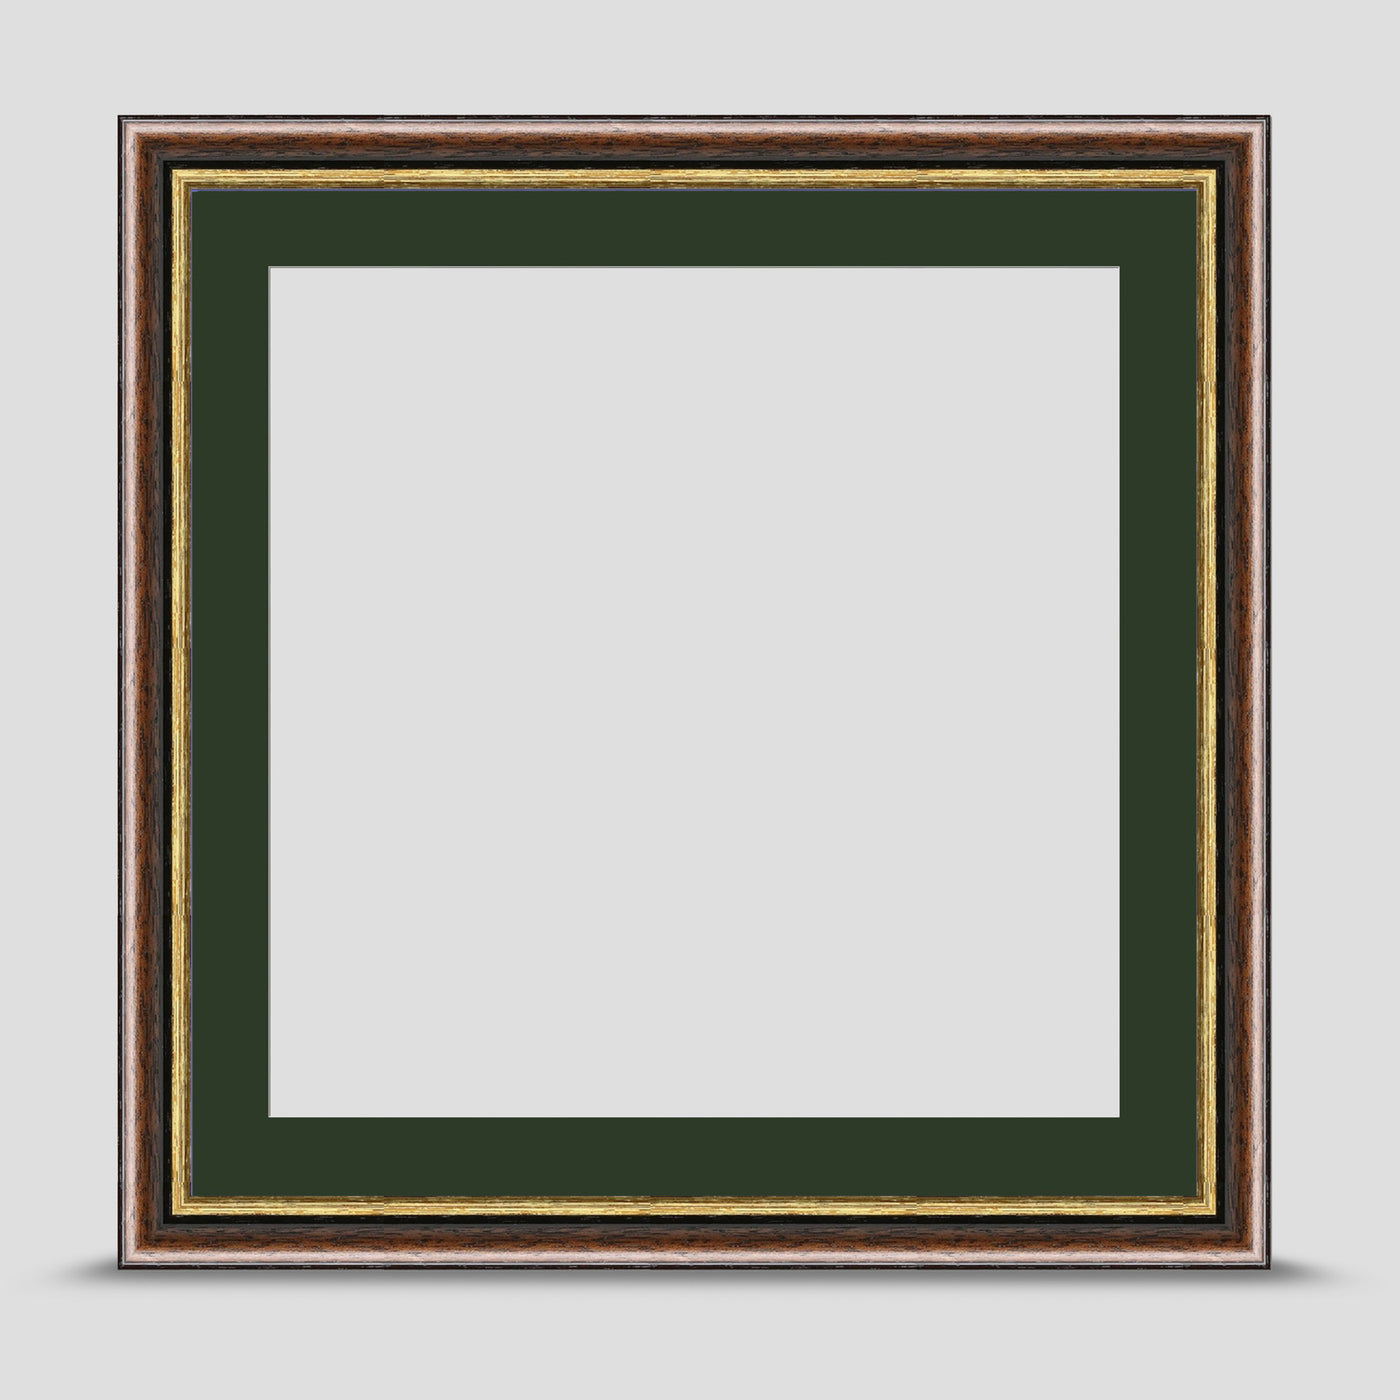 12x12 Brown & Gold Picture Frame with a 10x10 Mount